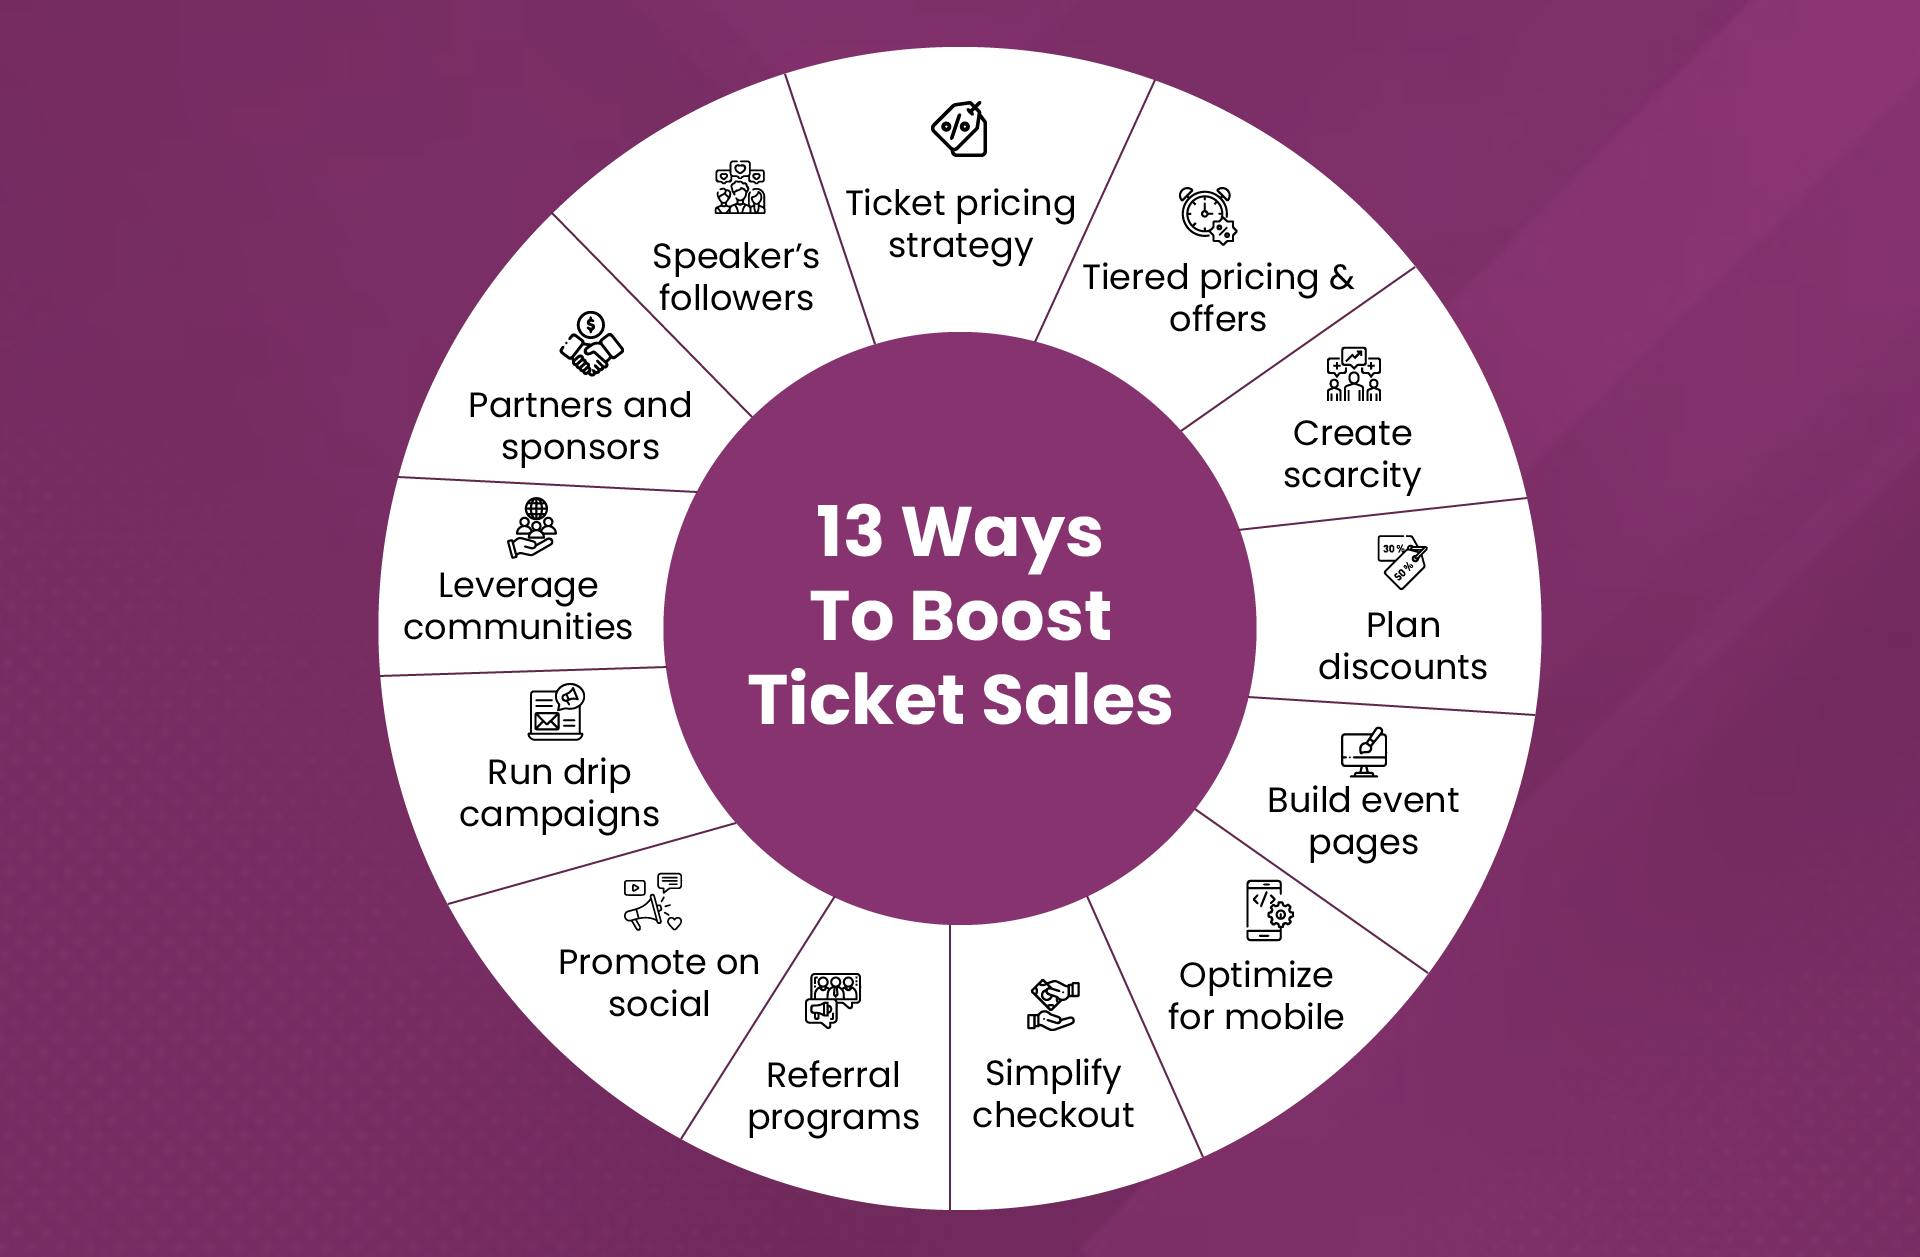 Tips To Increase Online Ticket Sales For Any Event